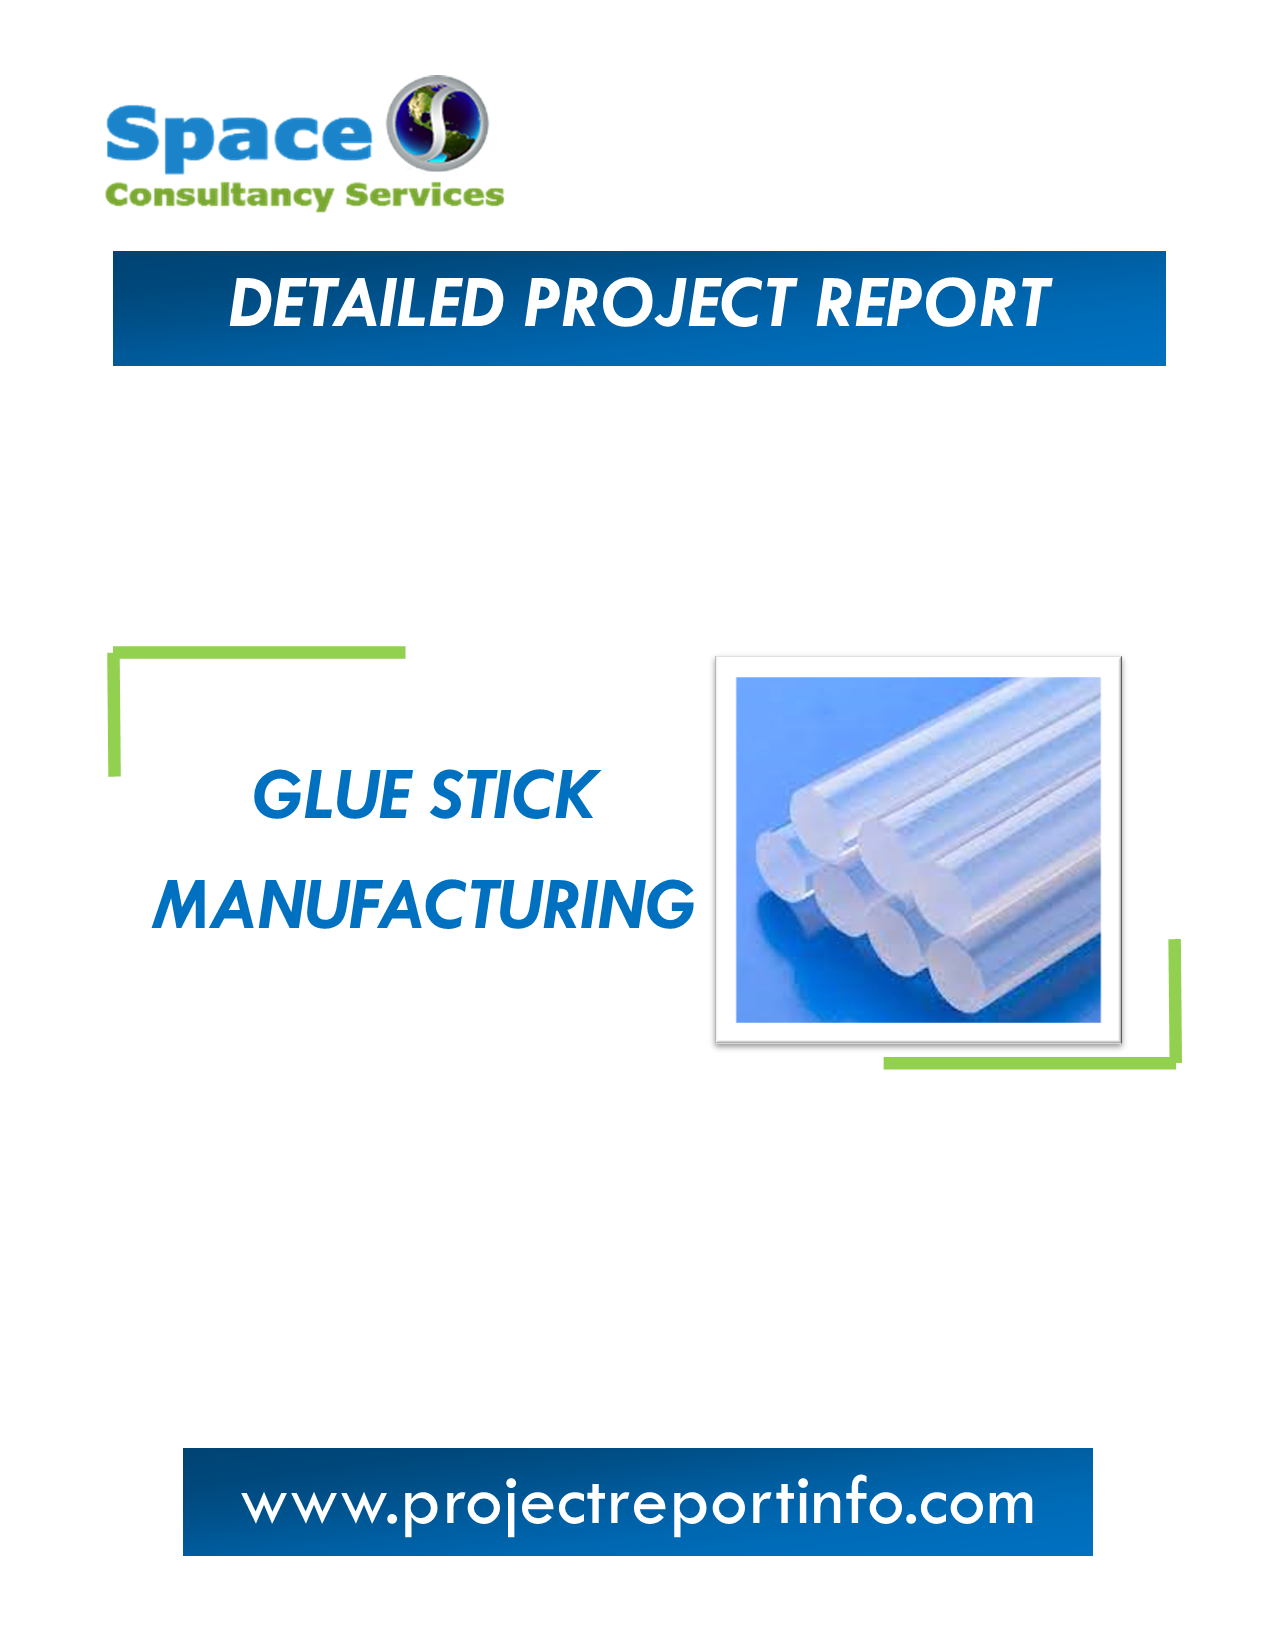 Project Report on Glue Stick Manufacturing